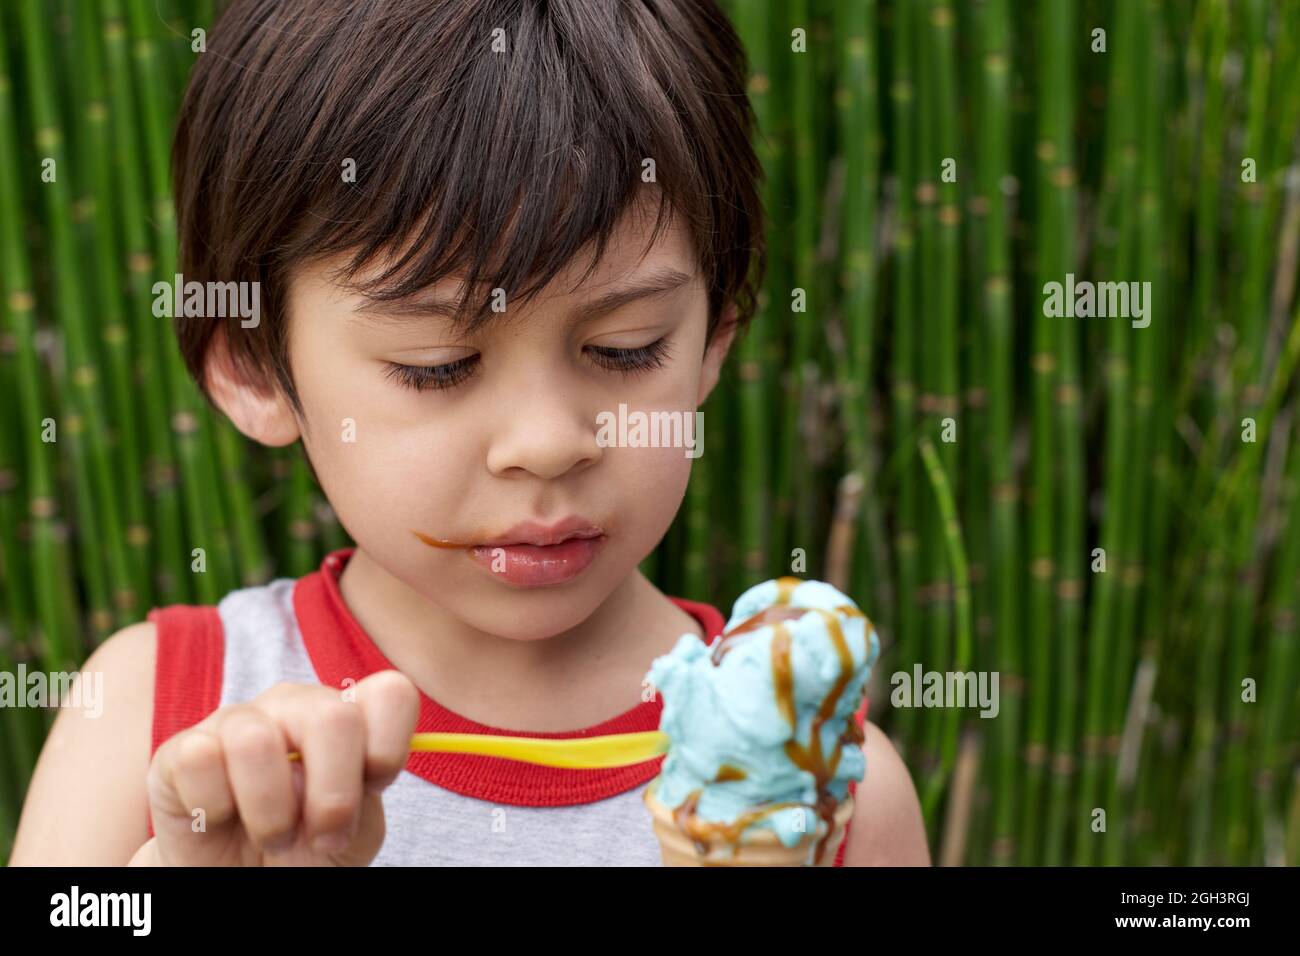 Brunette little boy eating ice cream cone with a spoon wearing sleeveless shirt in summertime. Green plants on background. Horizontal Stock Photo